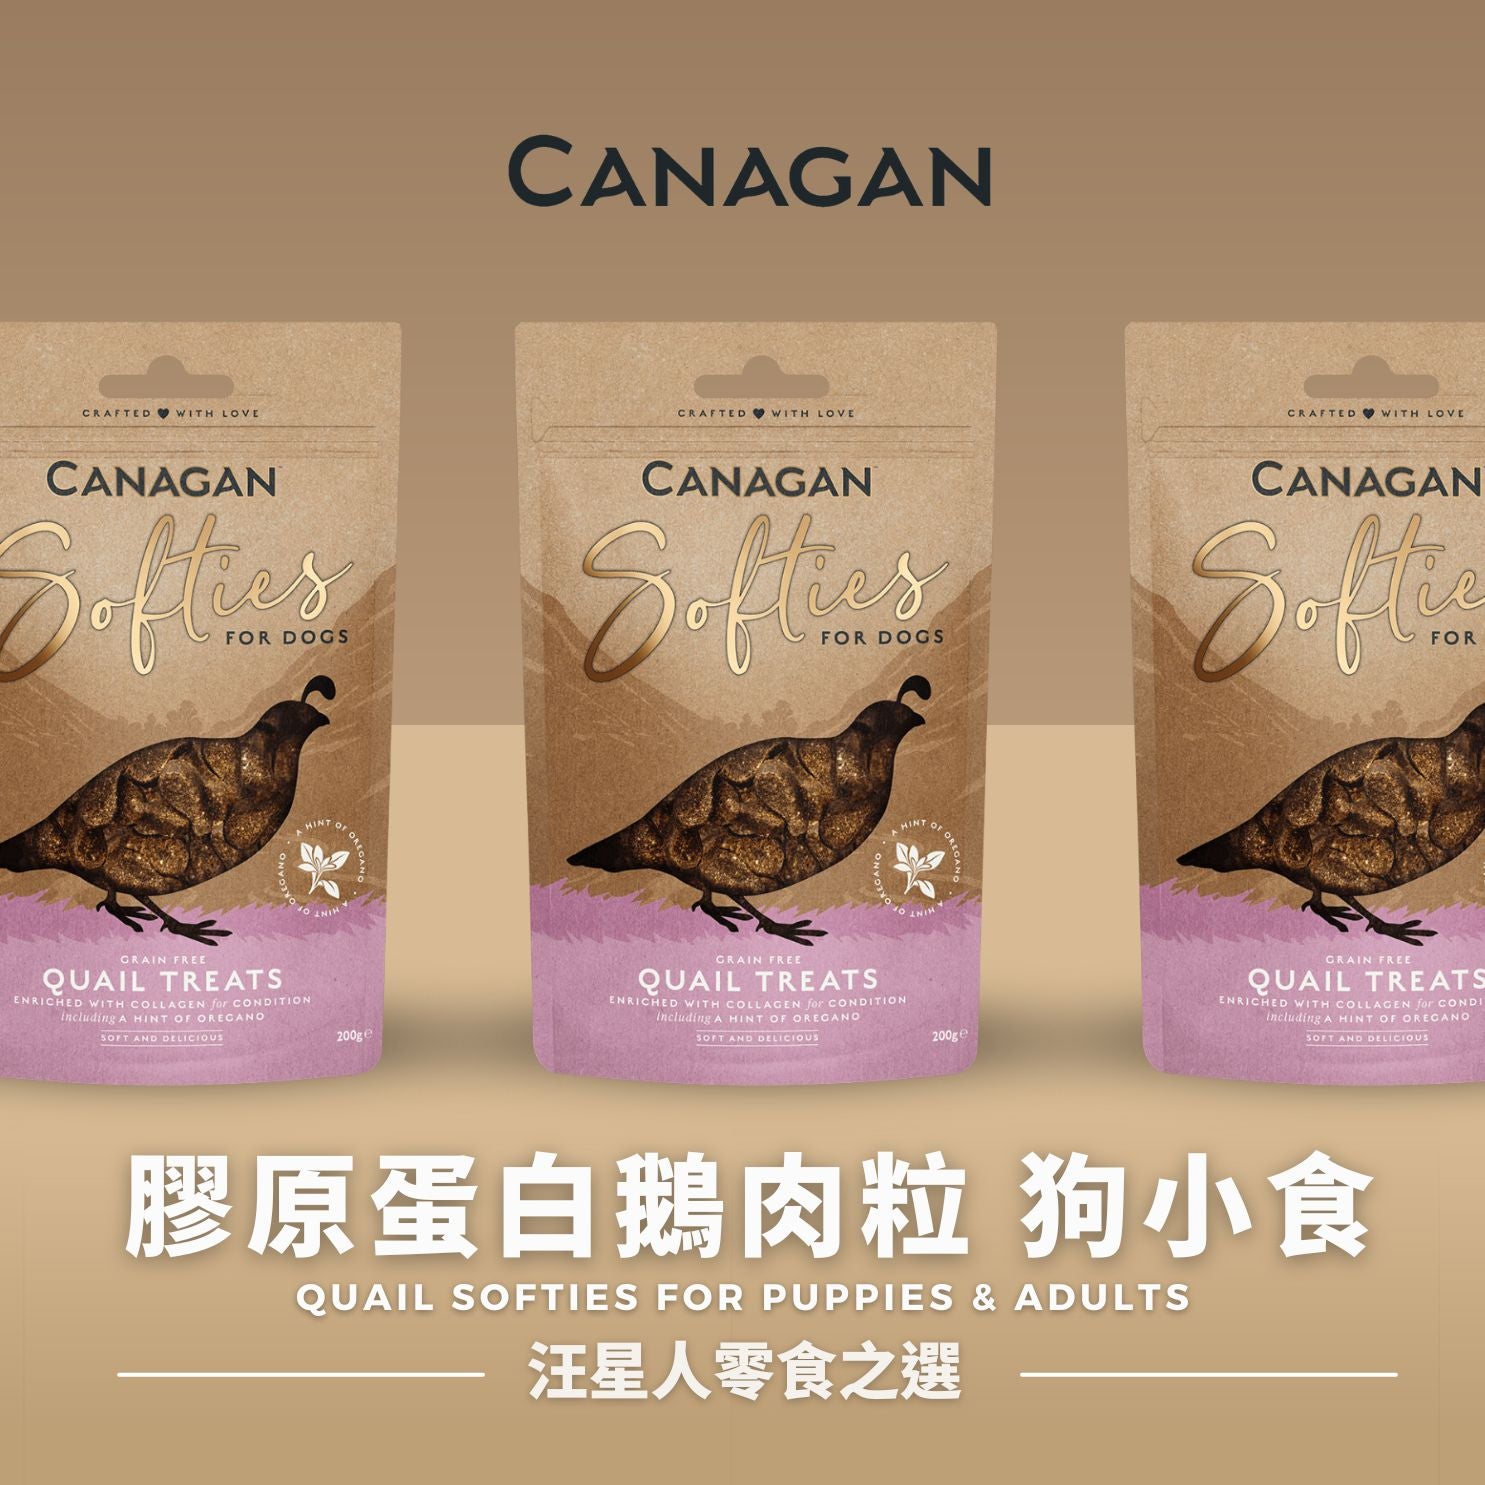 CANAGAN Softies for puppies & adults | 膠原蛋白狗小食